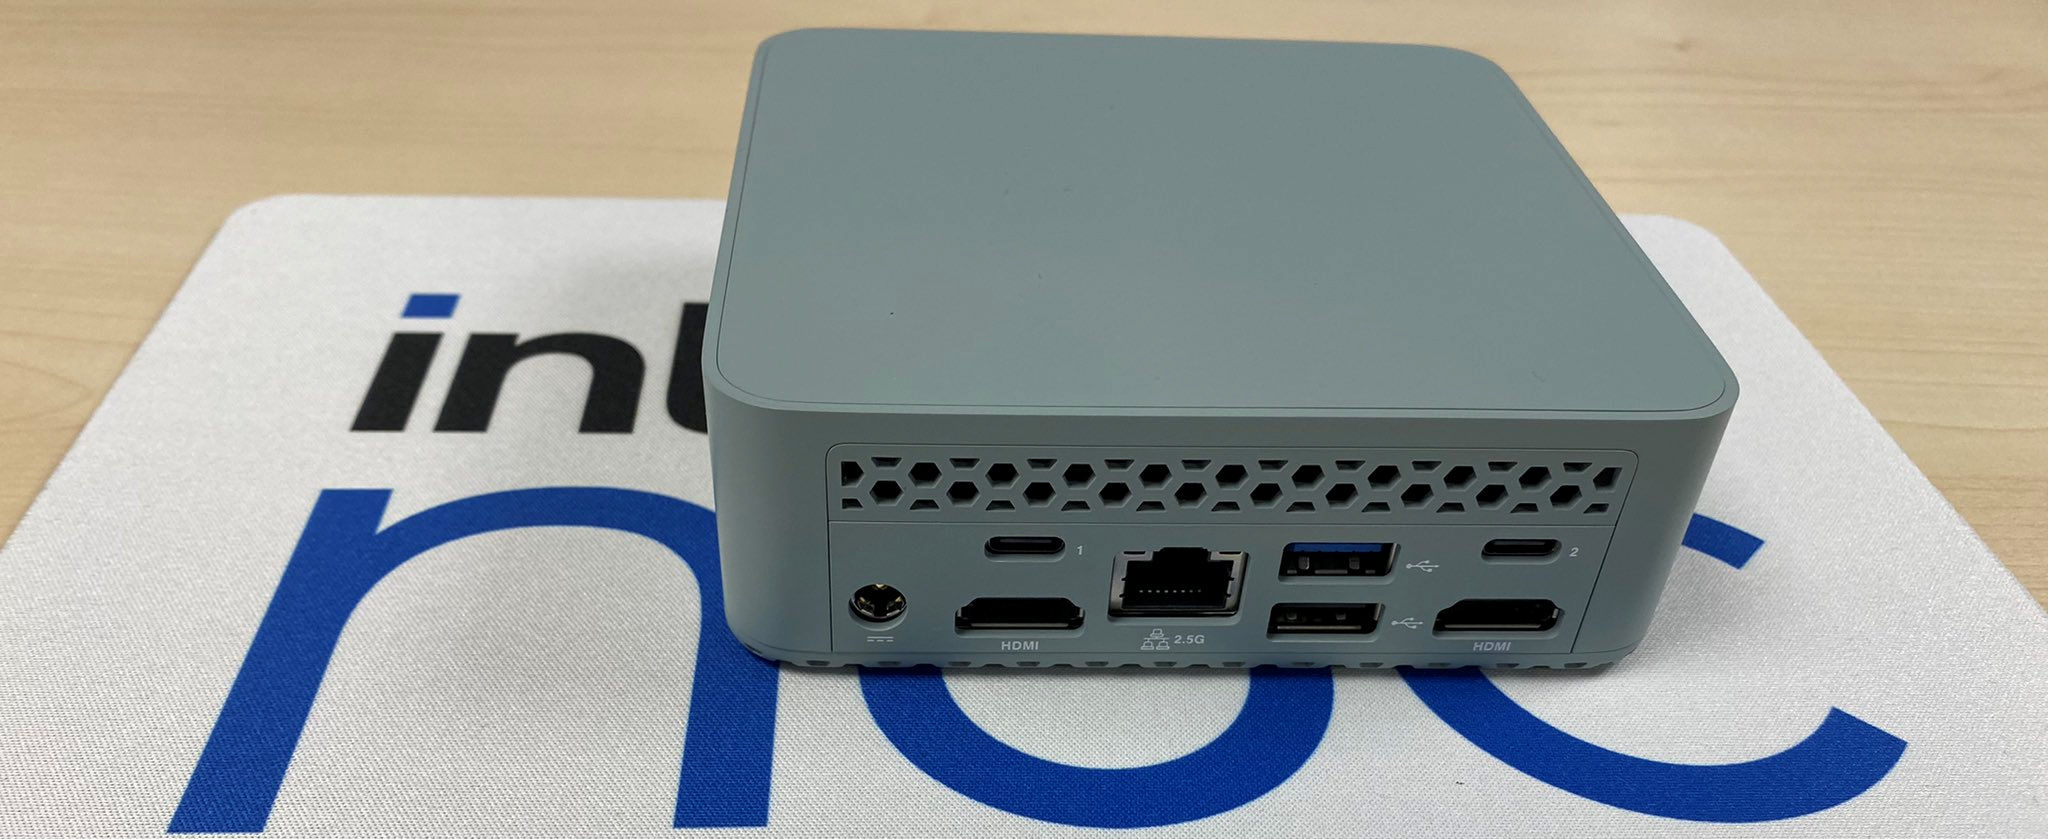 Intel NUC 13 Pro prototype shows updated design for 4x4 inch Mini-PC 